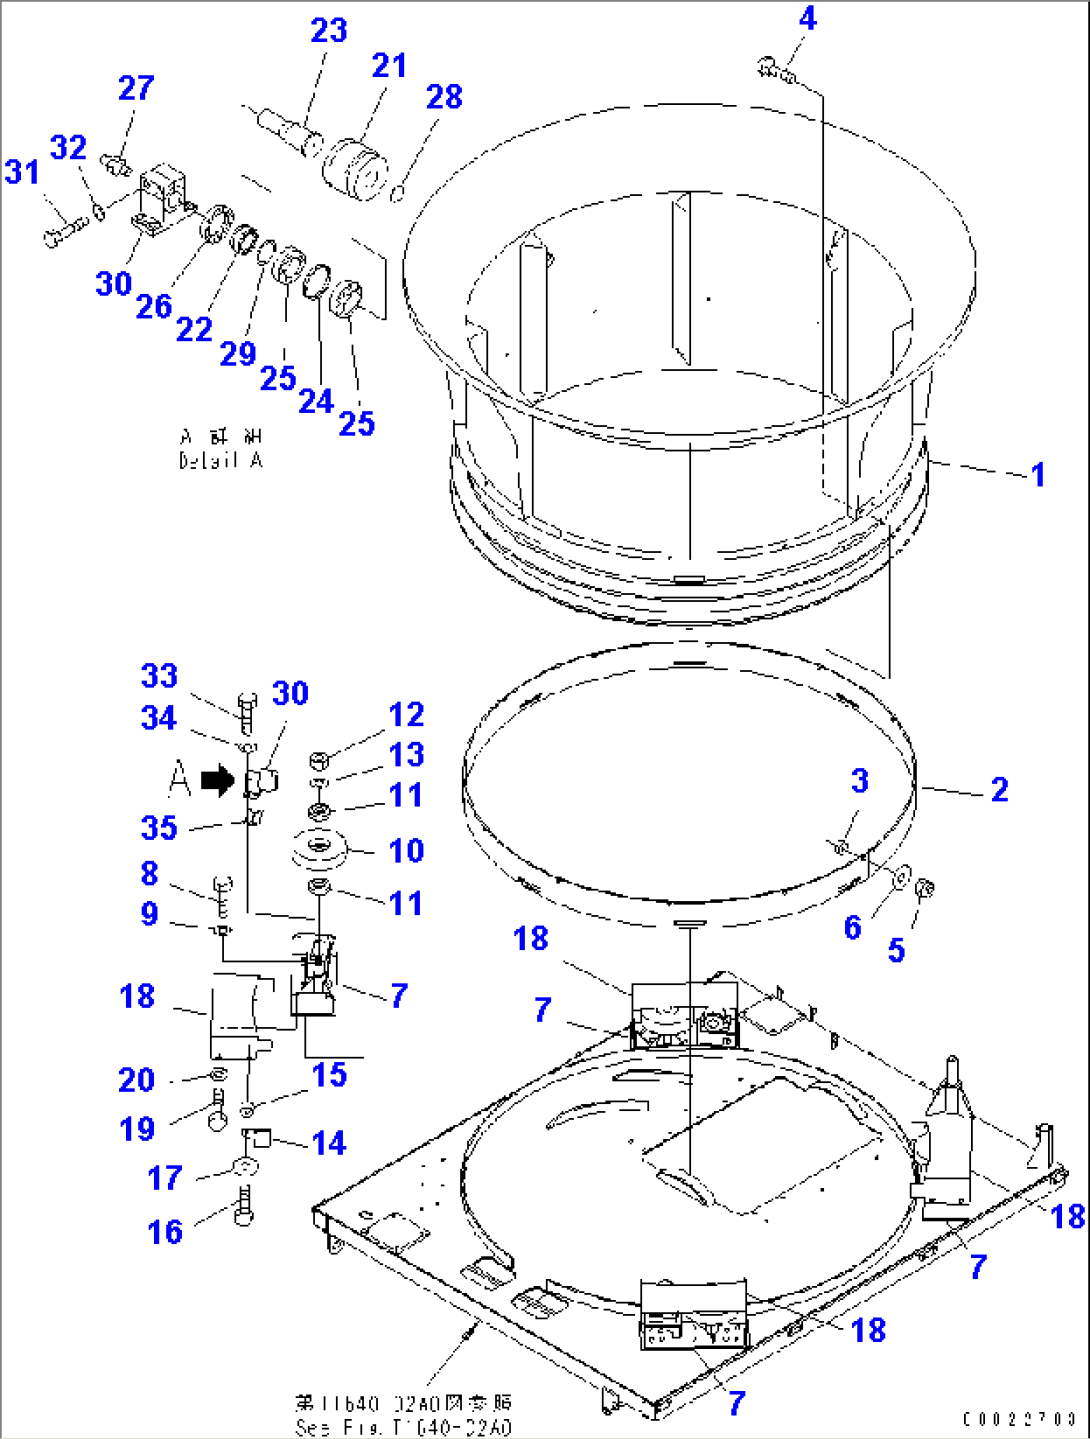 HAMMER MILL AND TUB (TUB AND ROLLER)(#1101-1309)